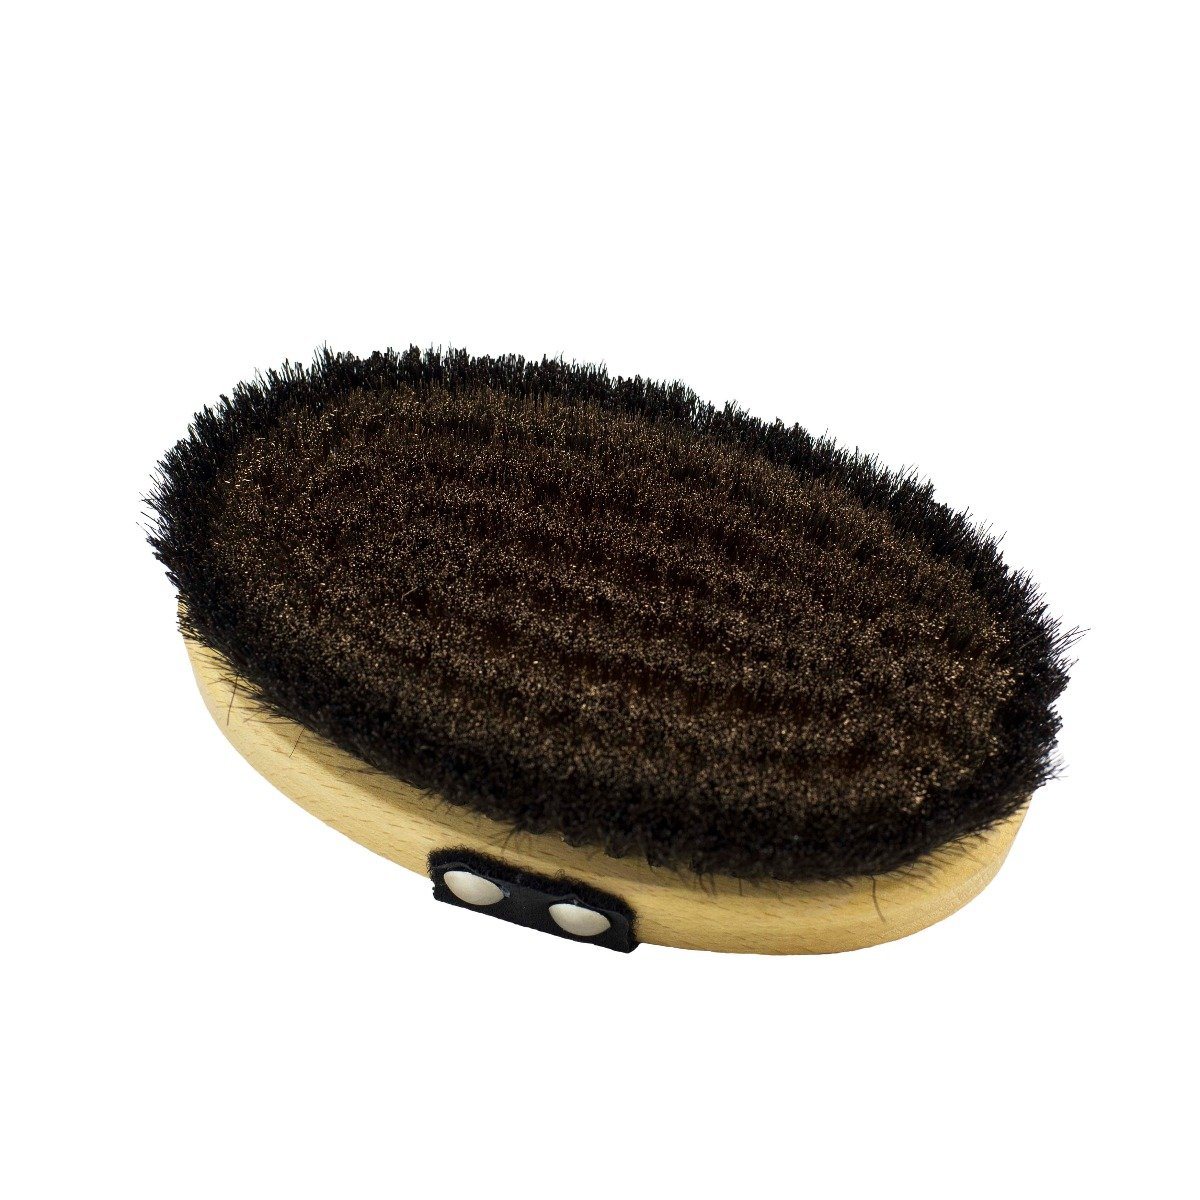 vendor-unknown Pastry Brush Goat Hair